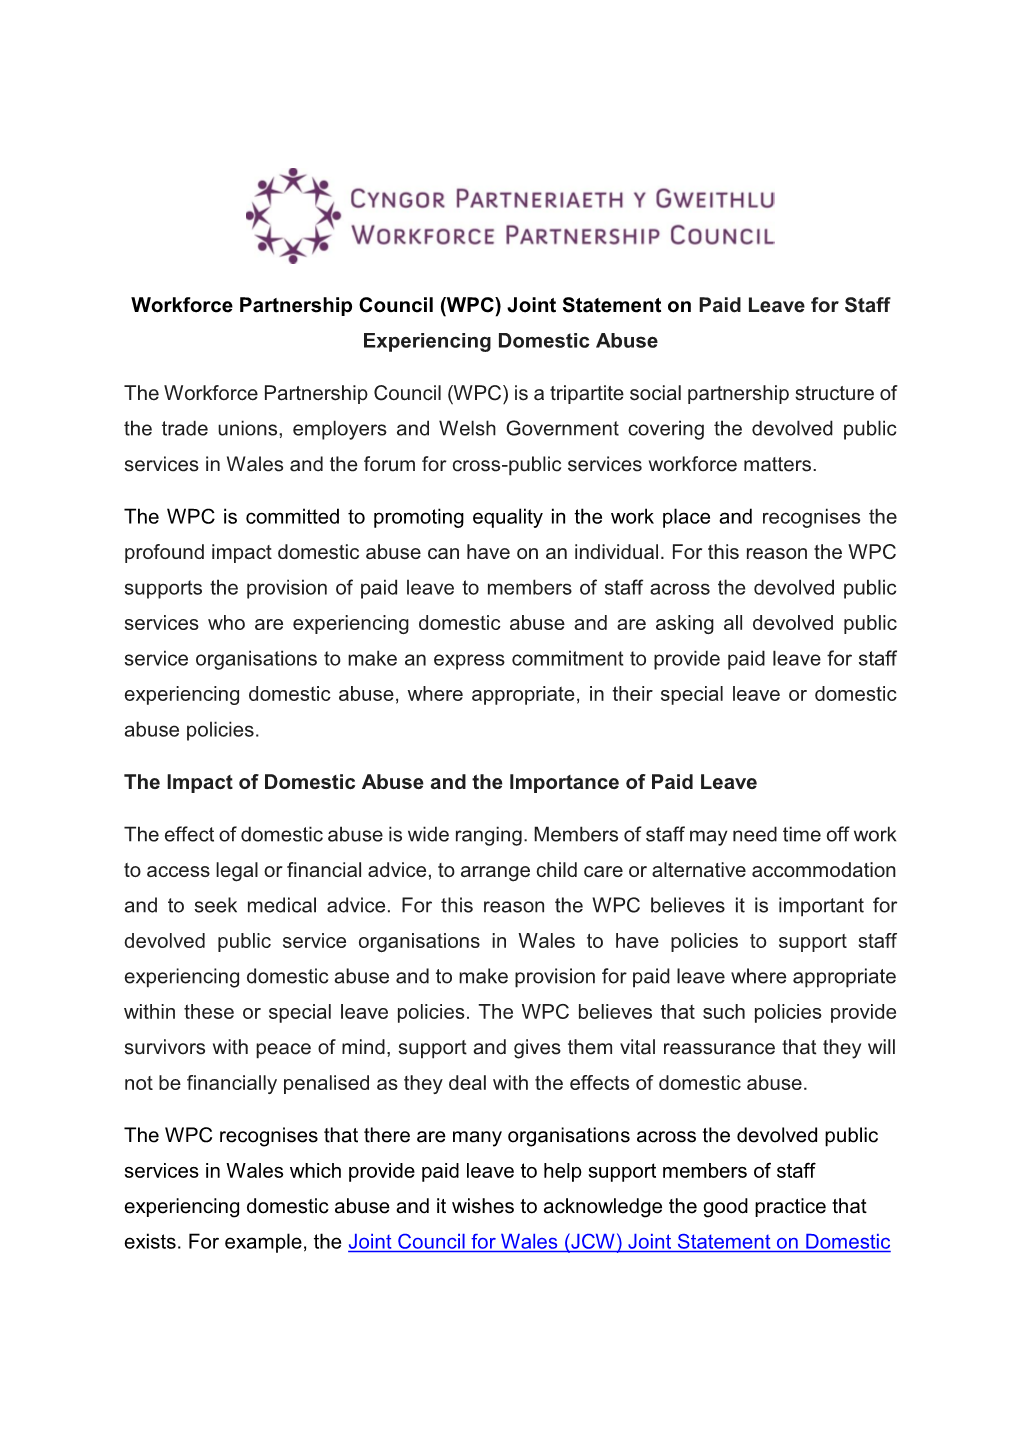 Workforce Partnership Council (WPC) Joint Statement on Paid Leave for Staff Experiencing Domestic Abuse